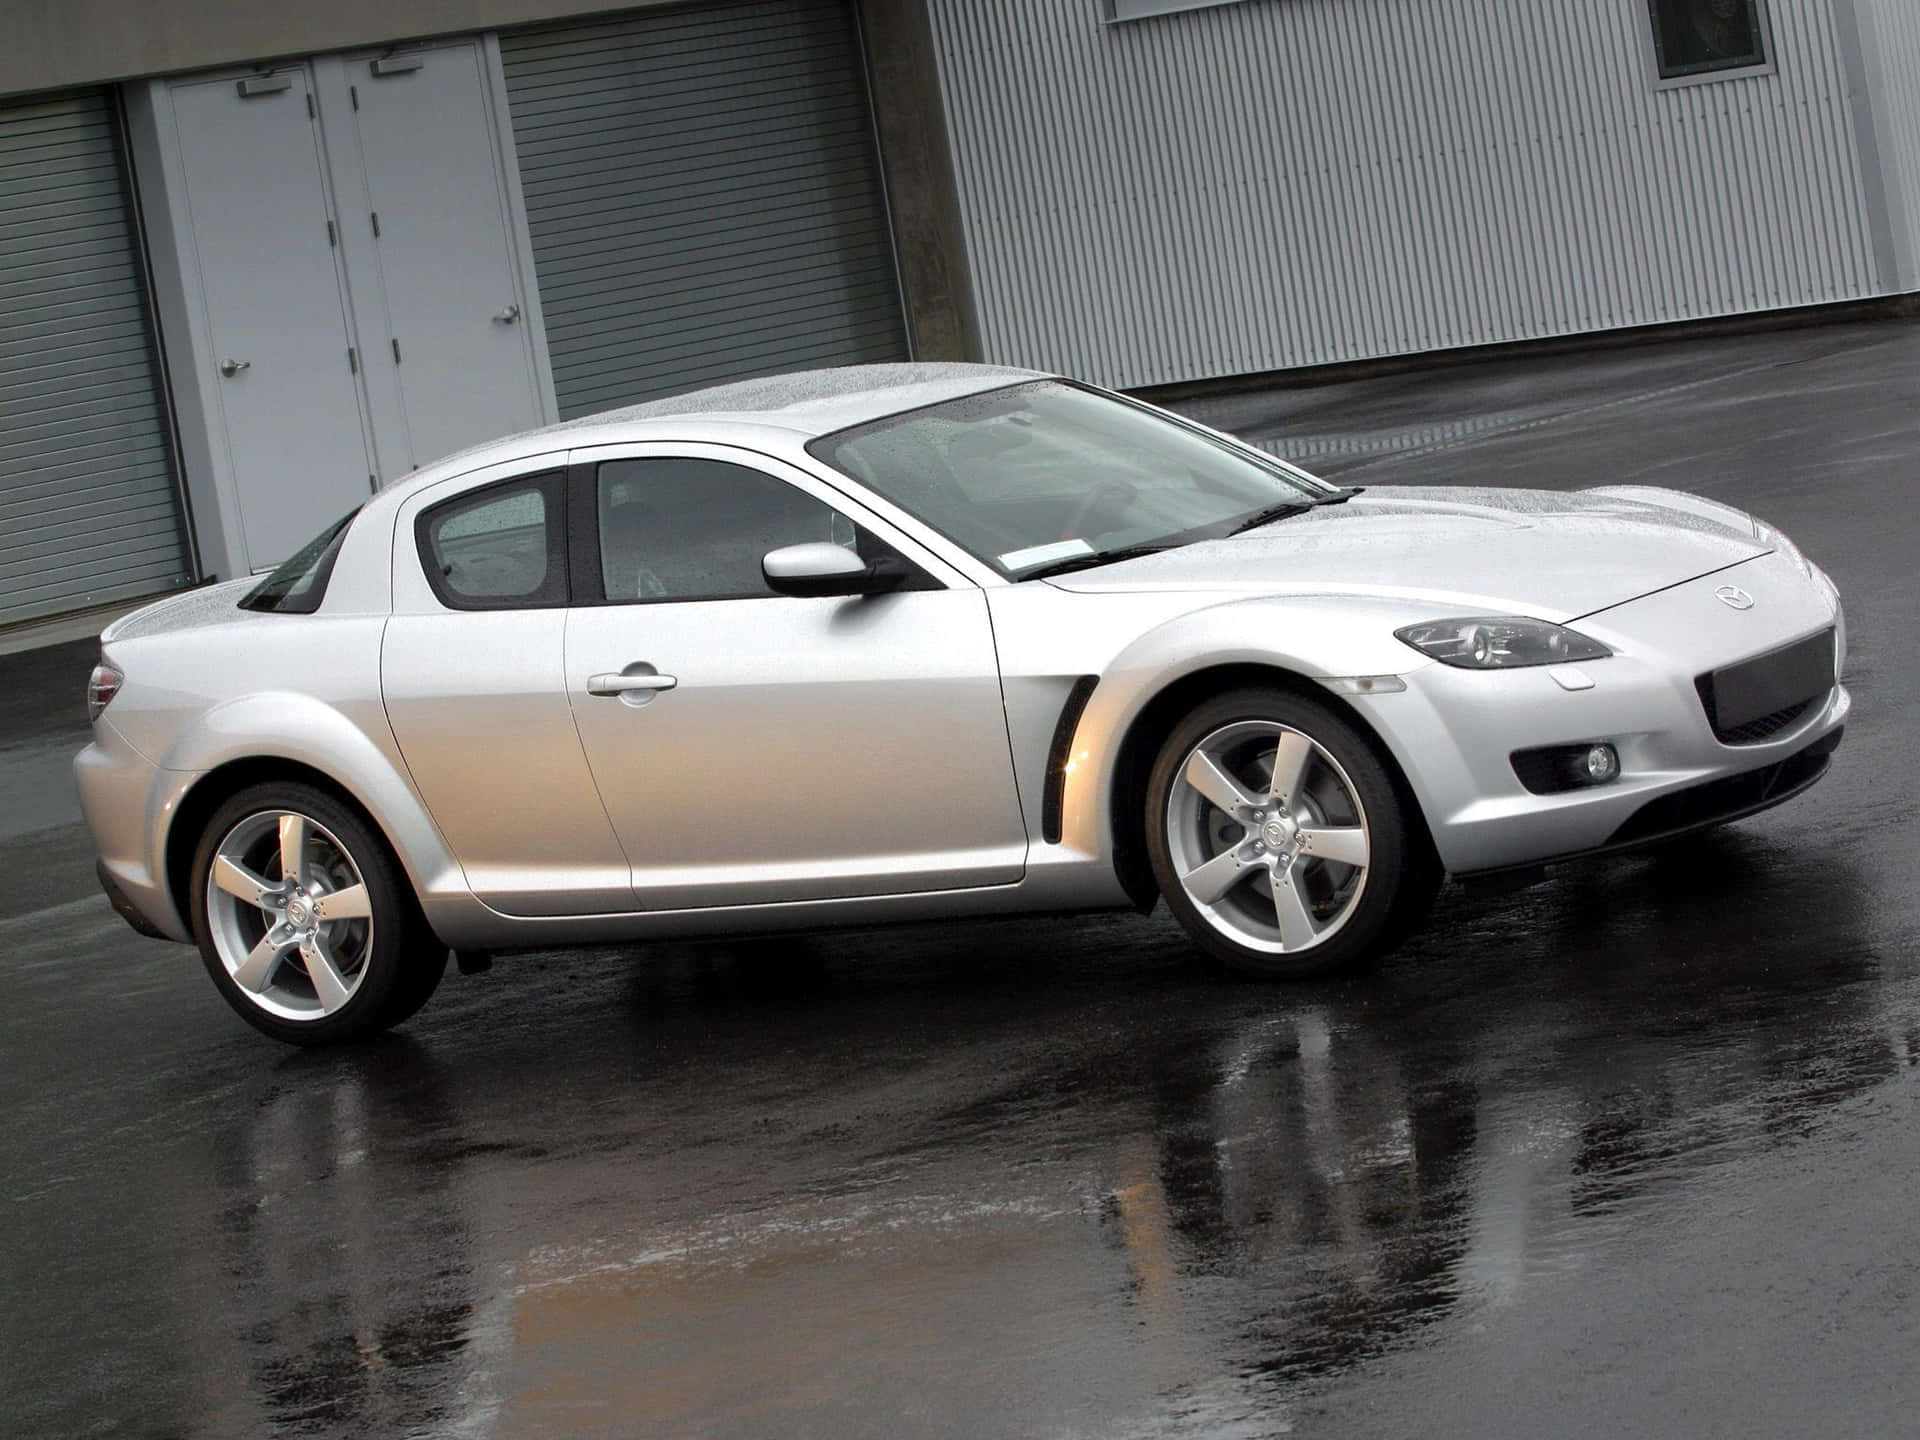 Sleek and Stylish Mazda RX-8 on the Road Wallpaper